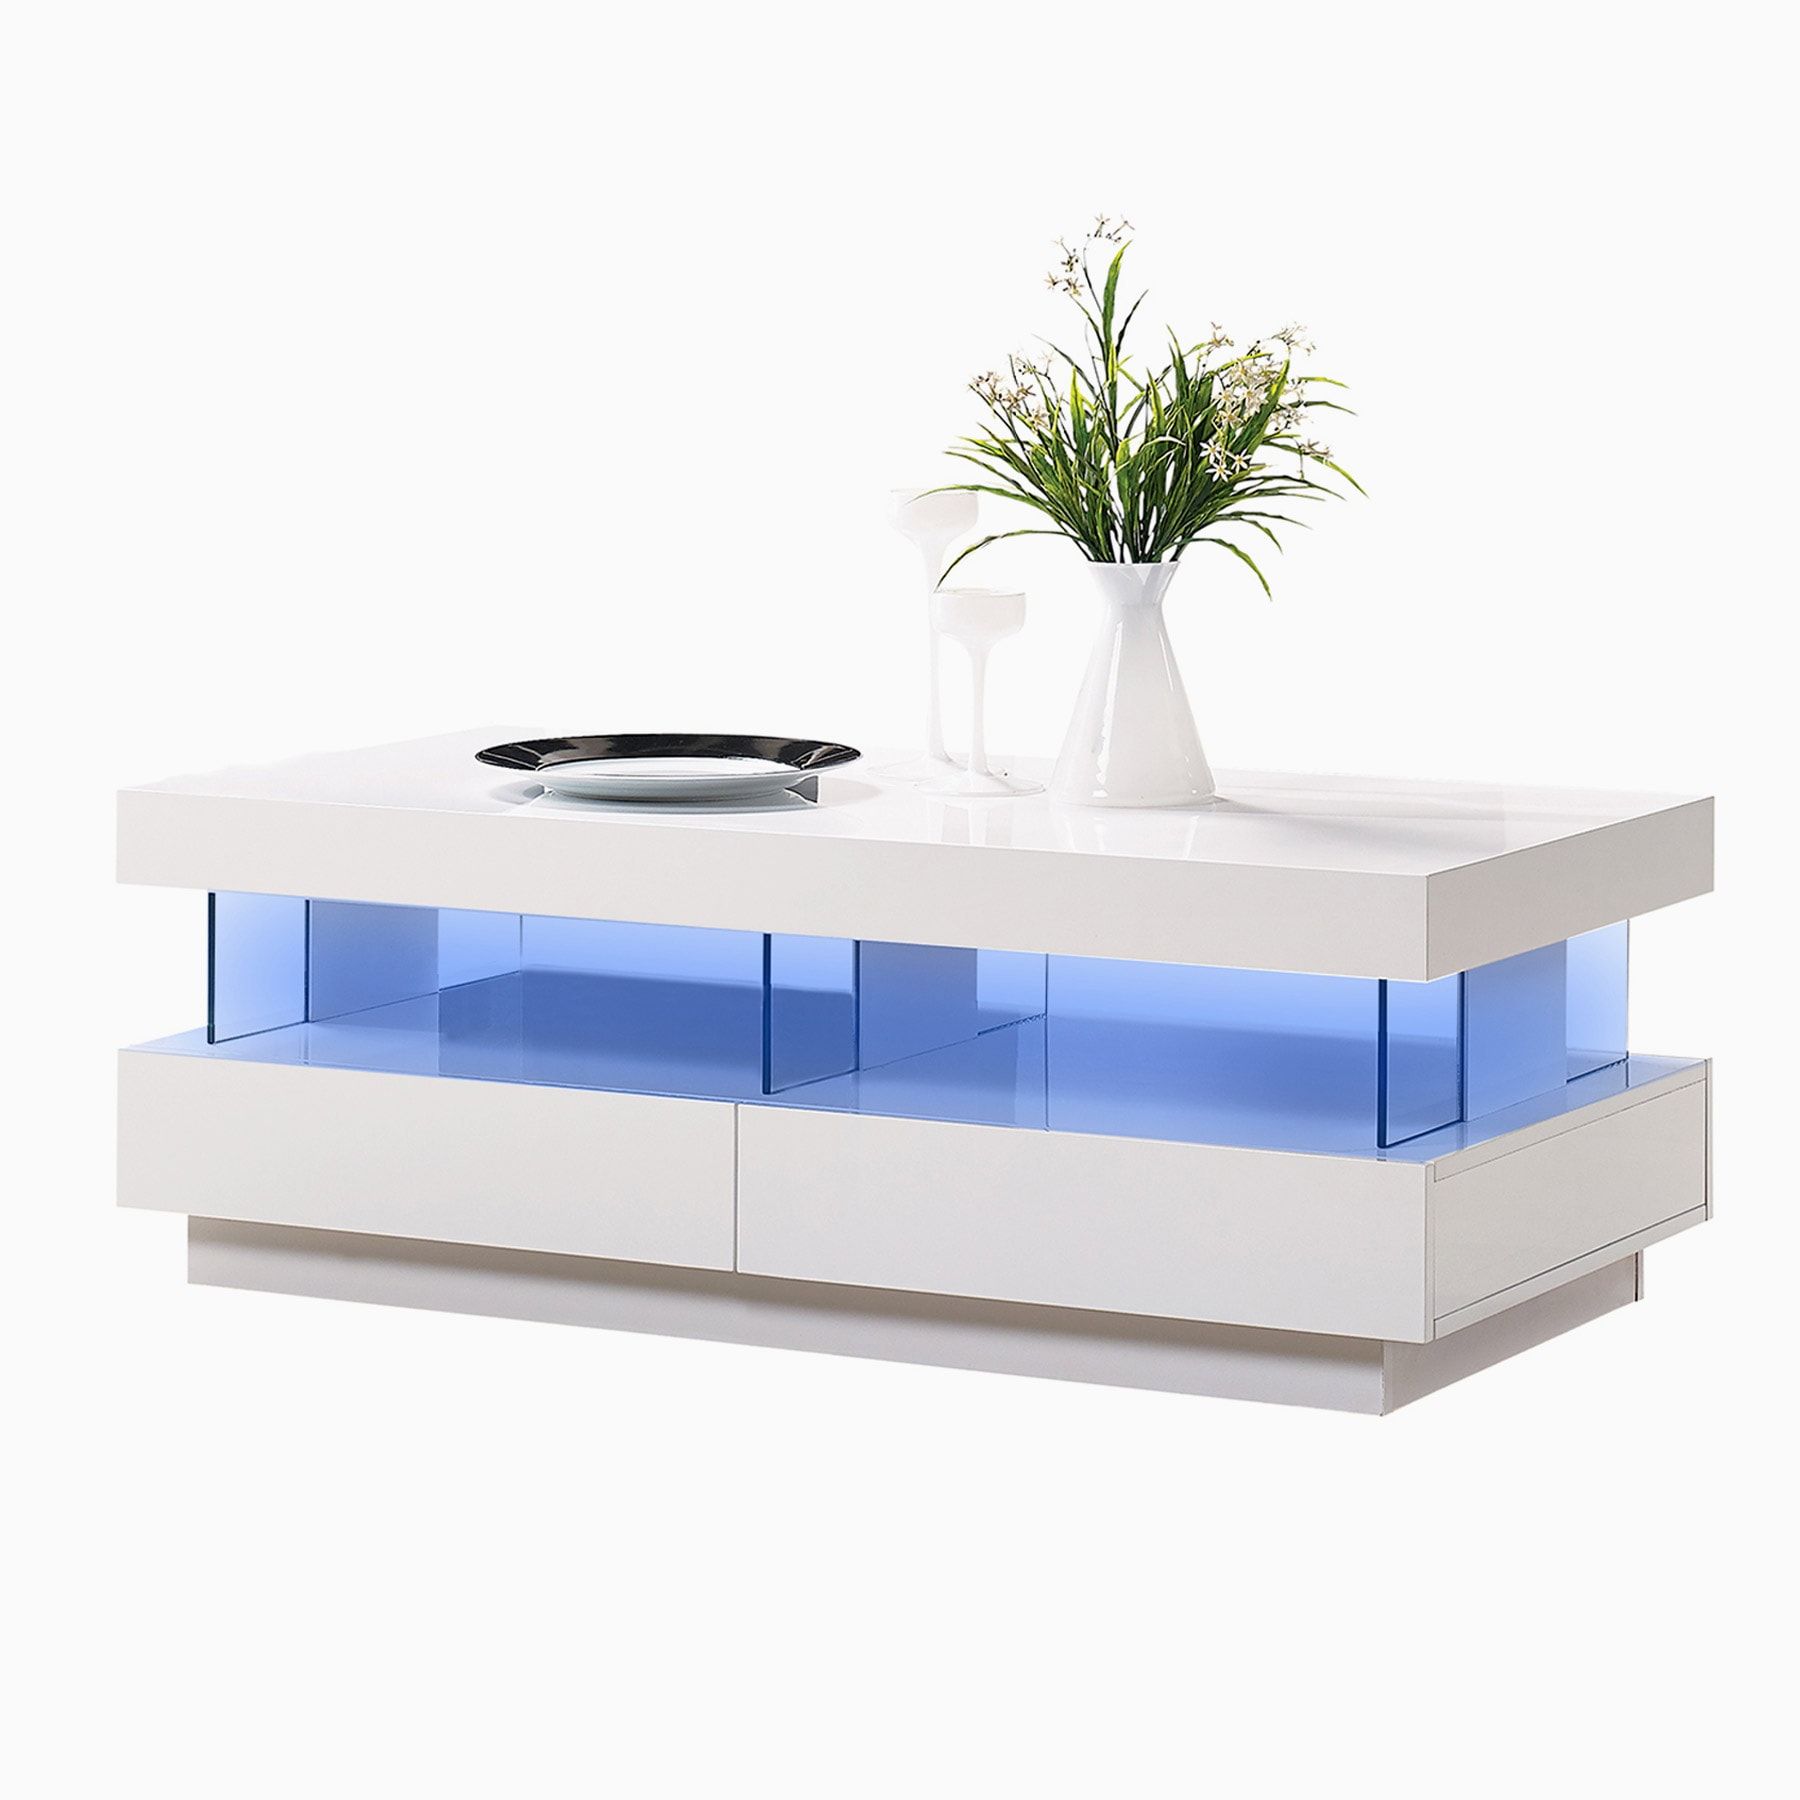 White Gloss Coffee Table Led Light | Au2052d| With Coffee Tables With Drawers And Led Lights (Gallery 14 of 20)